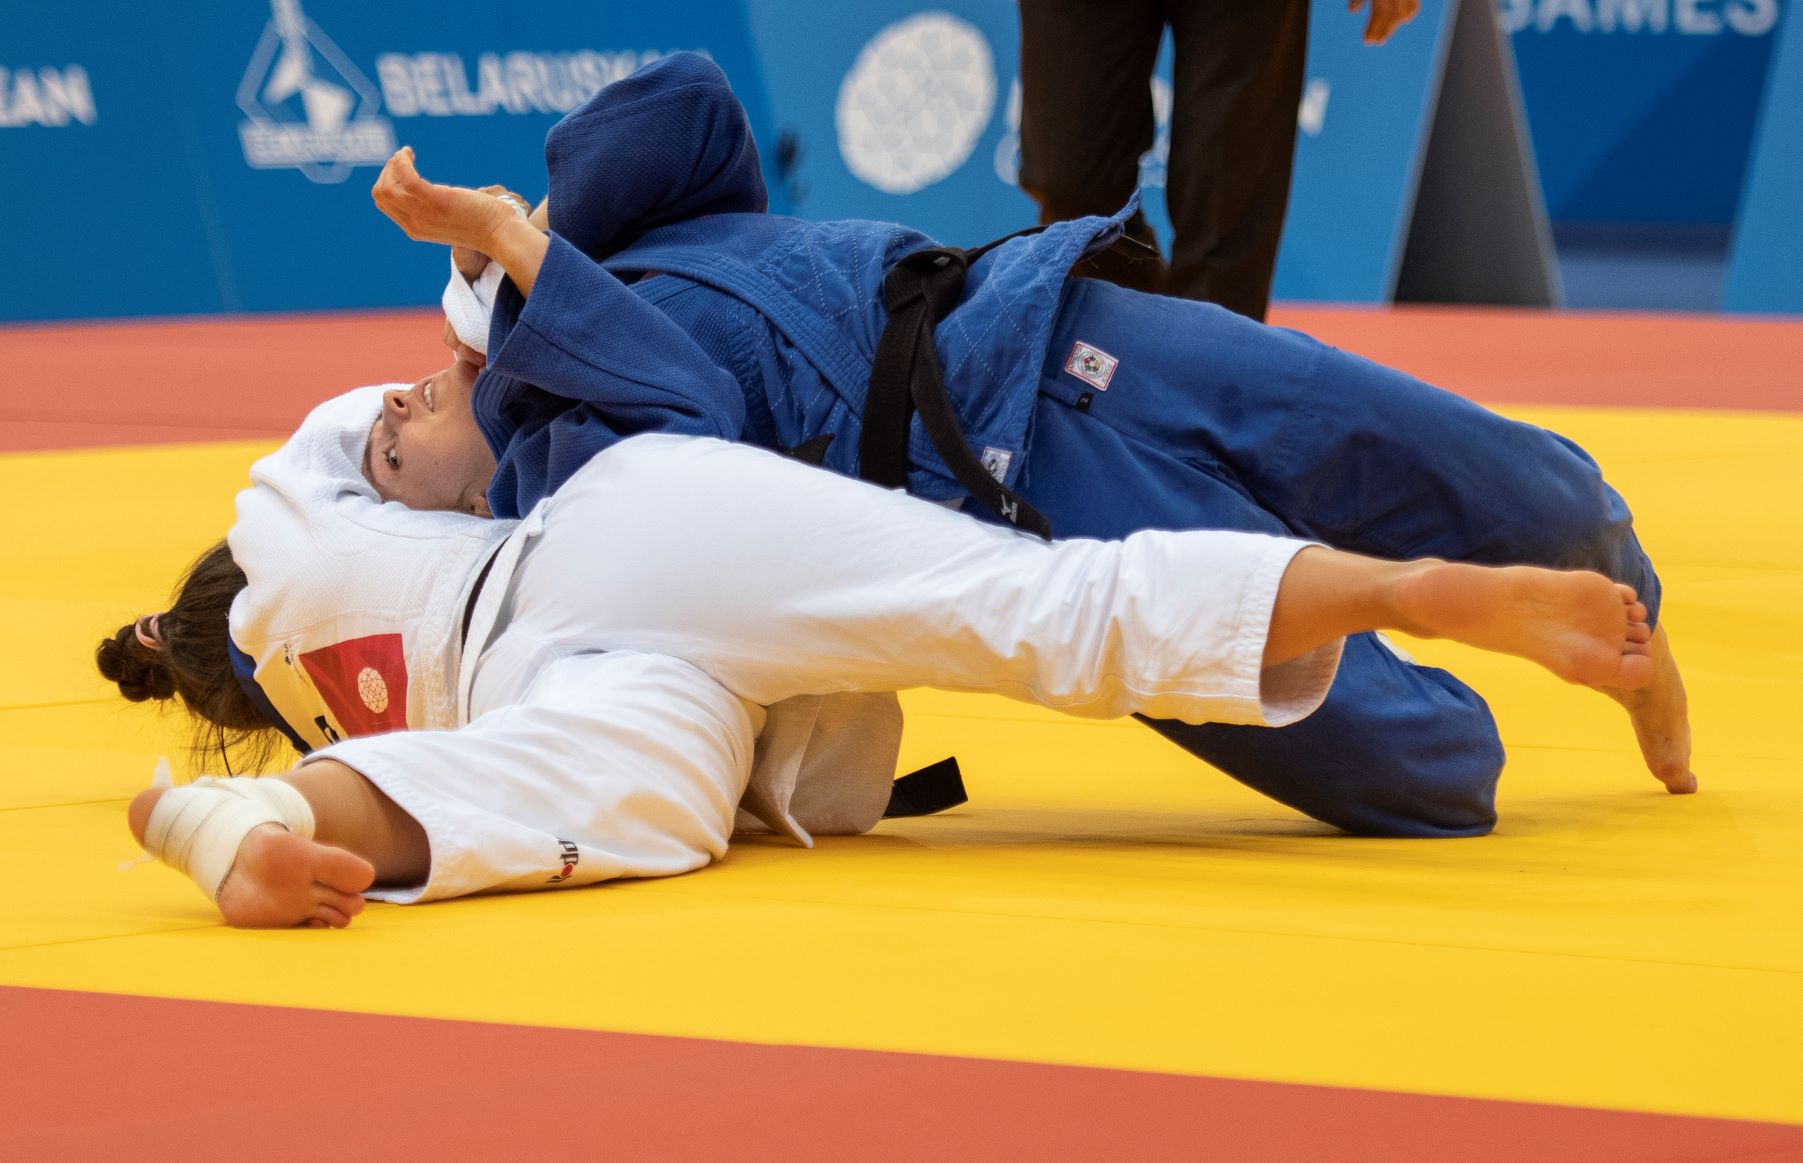 The best judokas in Europe are competing at the European Games. The stakes are high